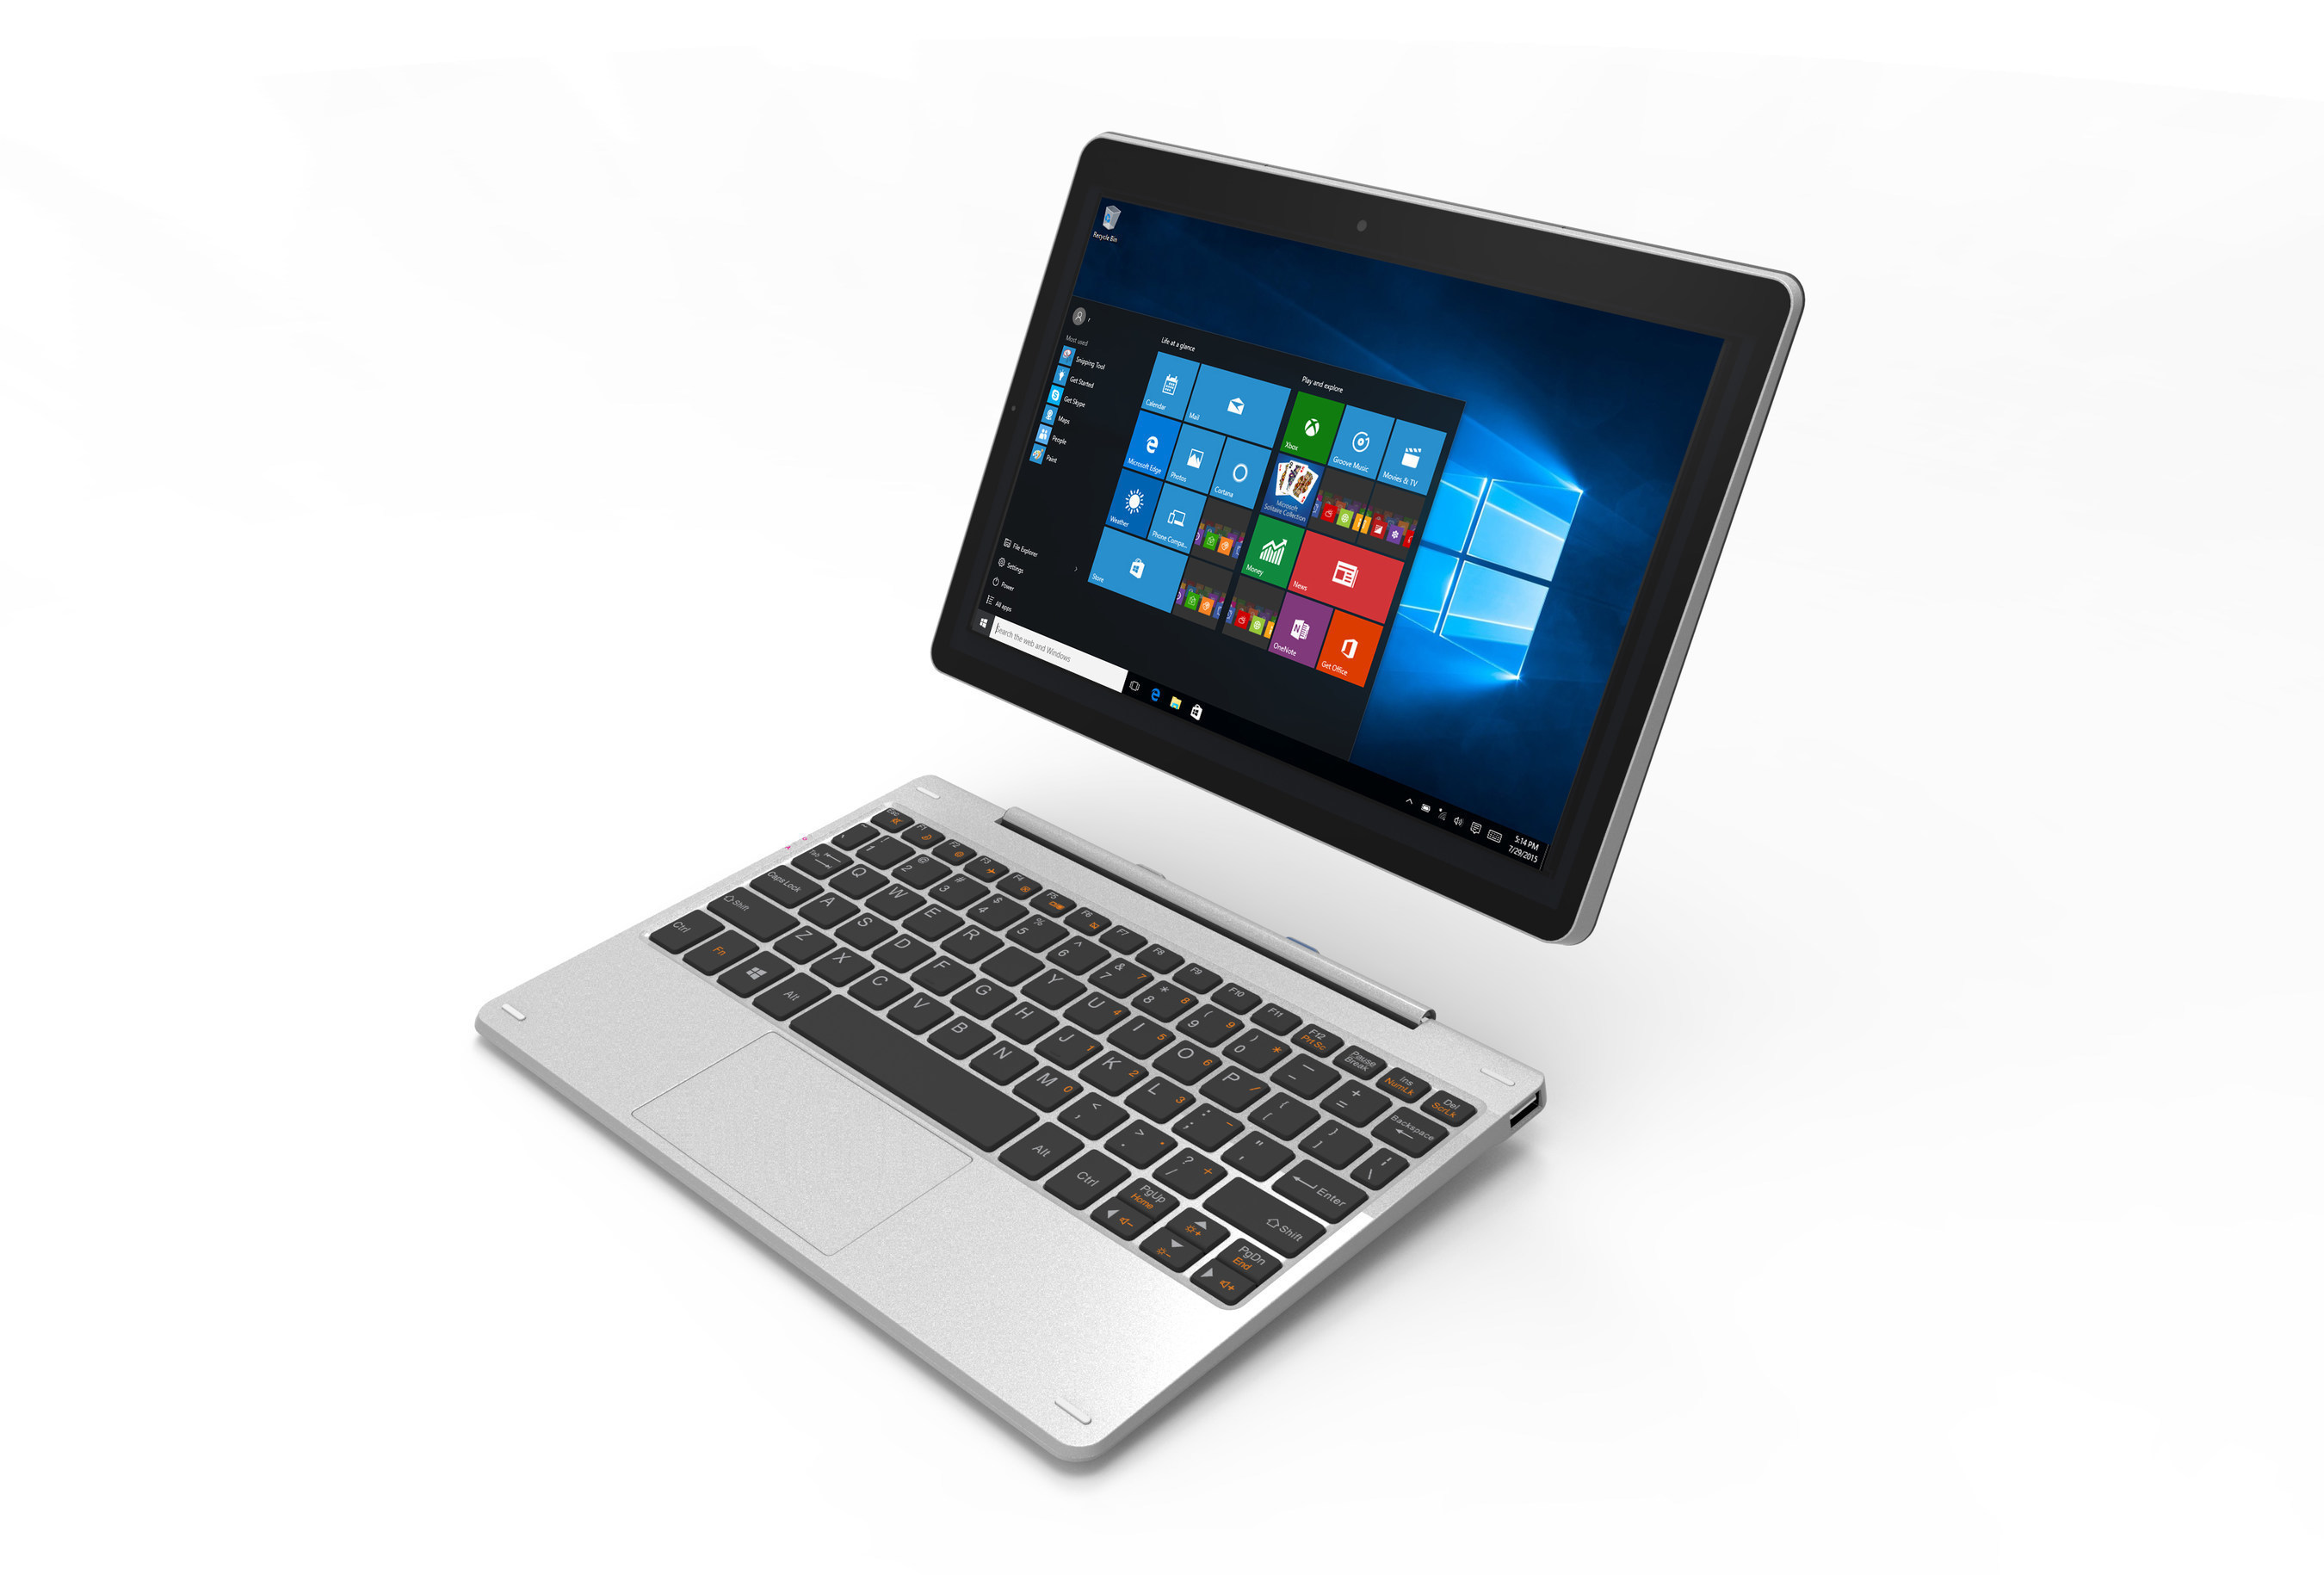 E FUN Introduces three new Nextbook Flexx 2-in-1 tablets powered by Windows 10. The Flexx 9A, Flexx 10A and Flexx 11A will be shown at CES 2016.